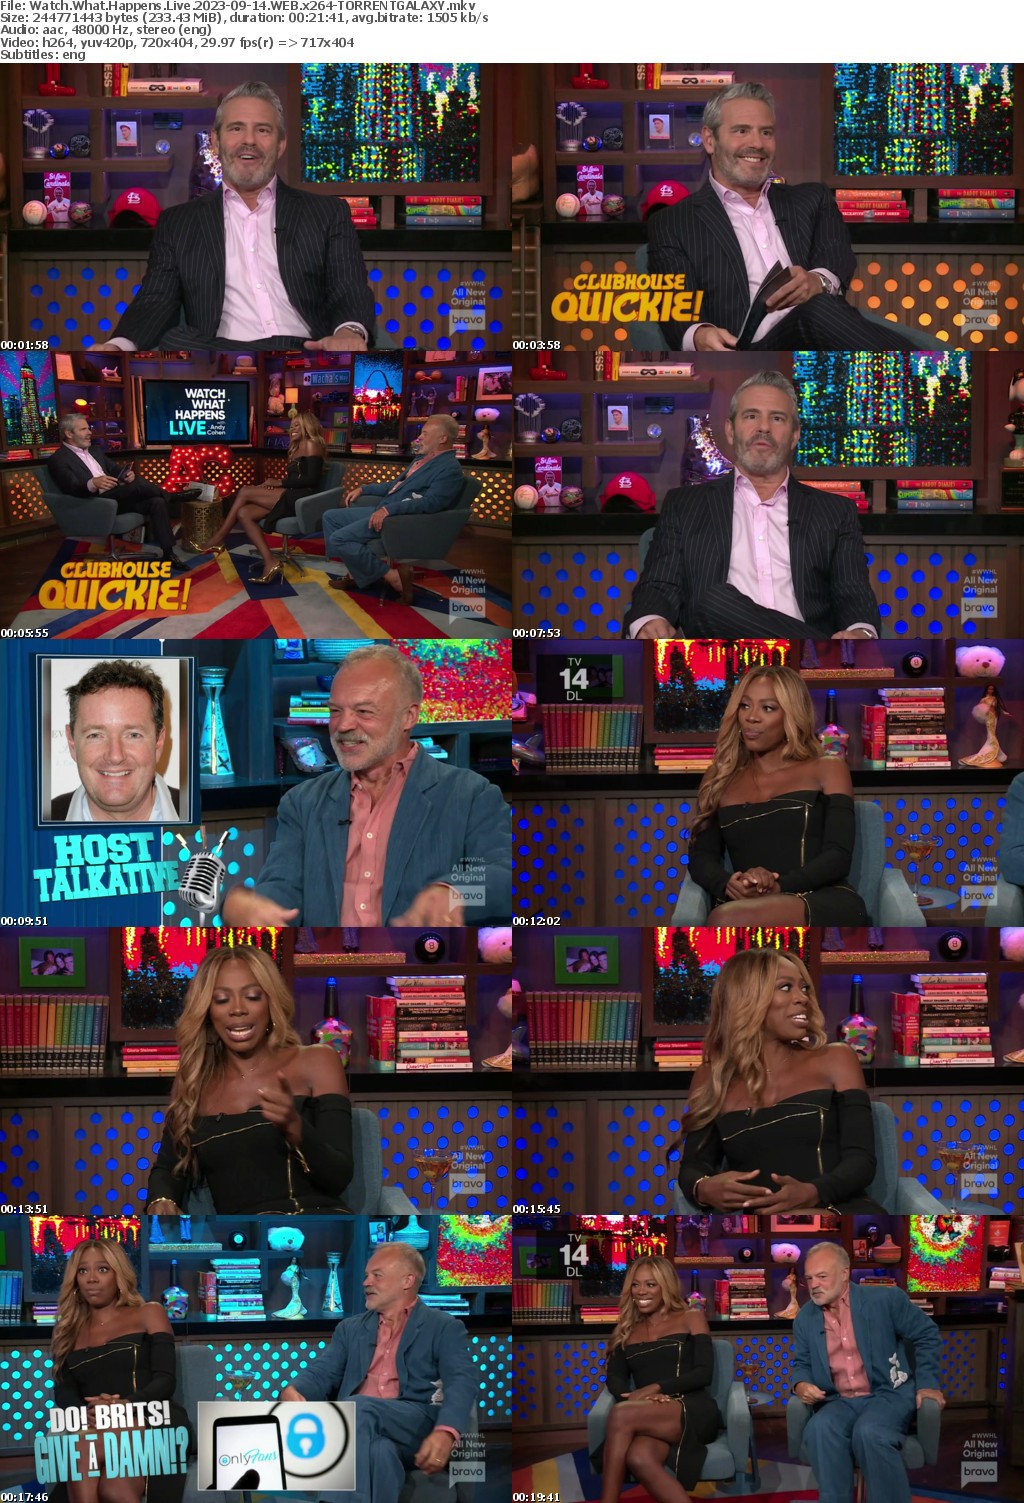 Watch What Happens Live 2023-09-14 WEB x264-GALAXY